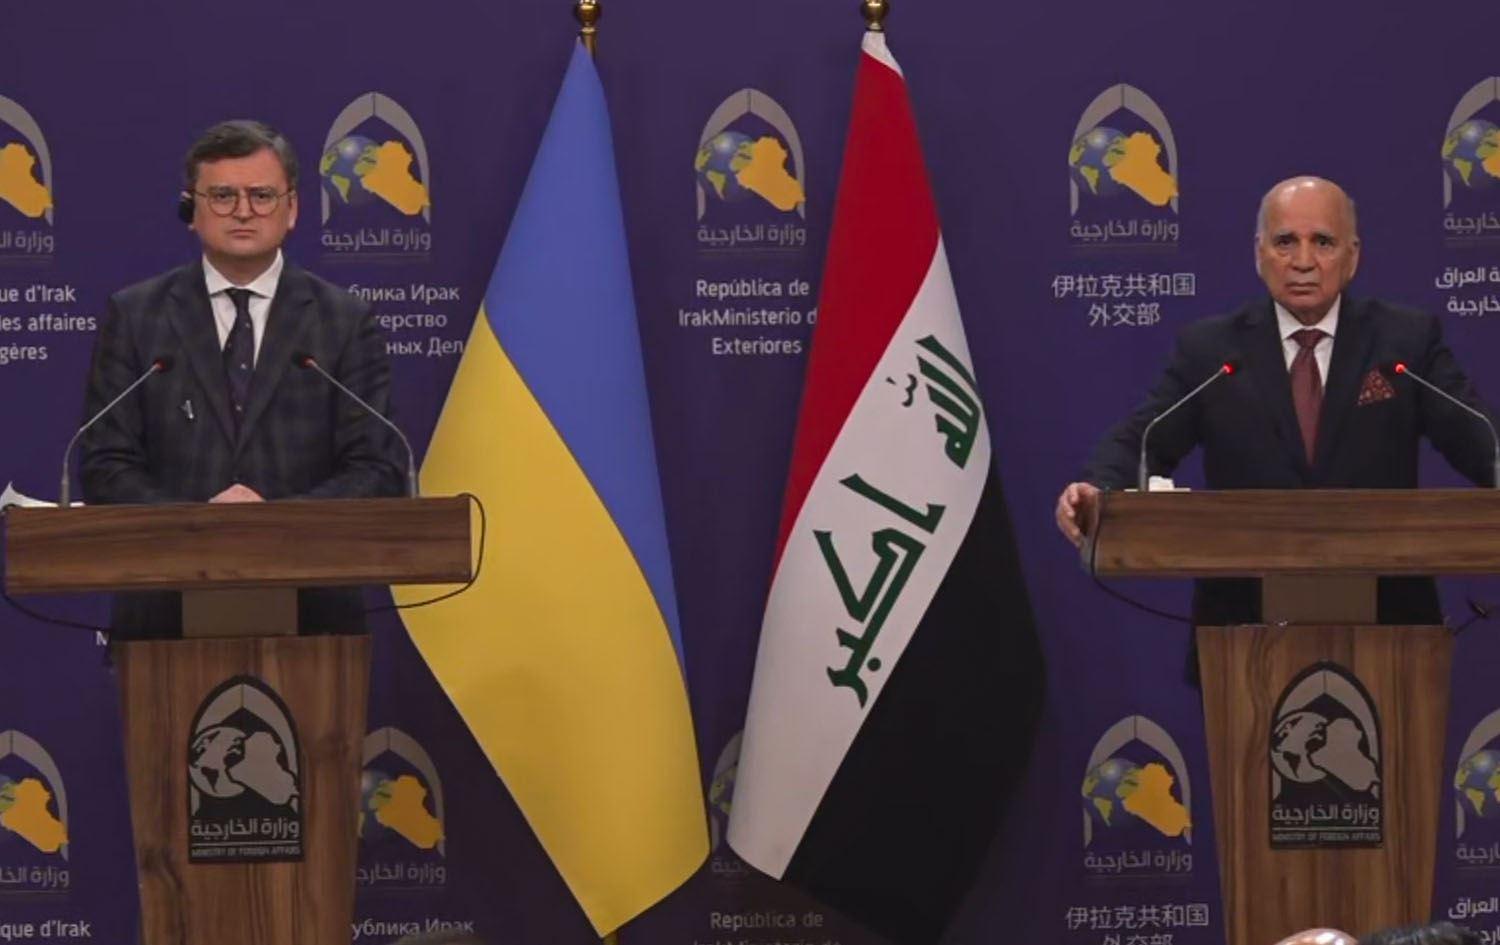 Iraqi Foreign Minister announced Baghdad's readiness to become a mediator between Ukraine and Russia